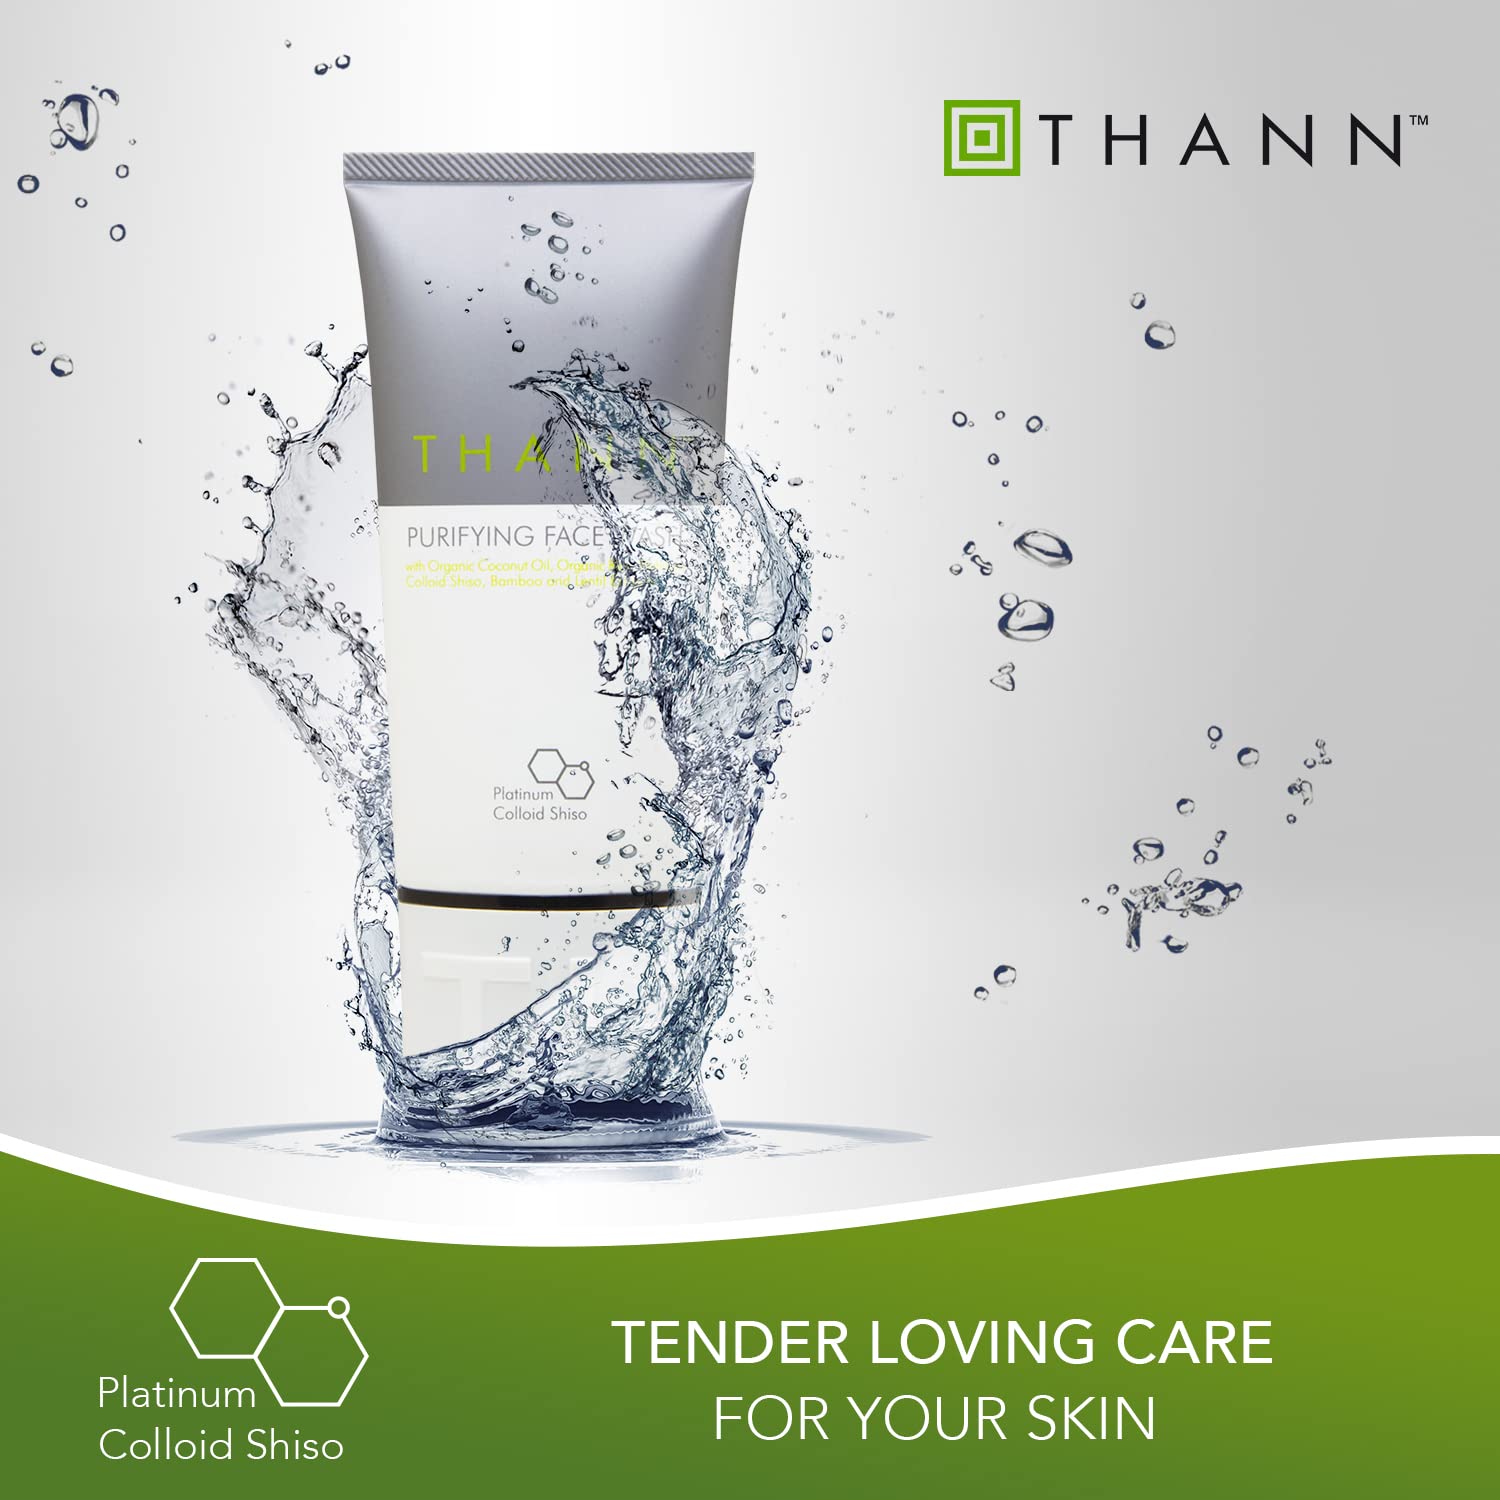 Thann Purifying Face Wash, Plant-based Facial Skin Care Products for Women and Men with Organic Coconut Oil, Rice and Shiso Leaf Extracts to Cleanse and Refine Pores for Radiant Skin (5.1 fl oz)